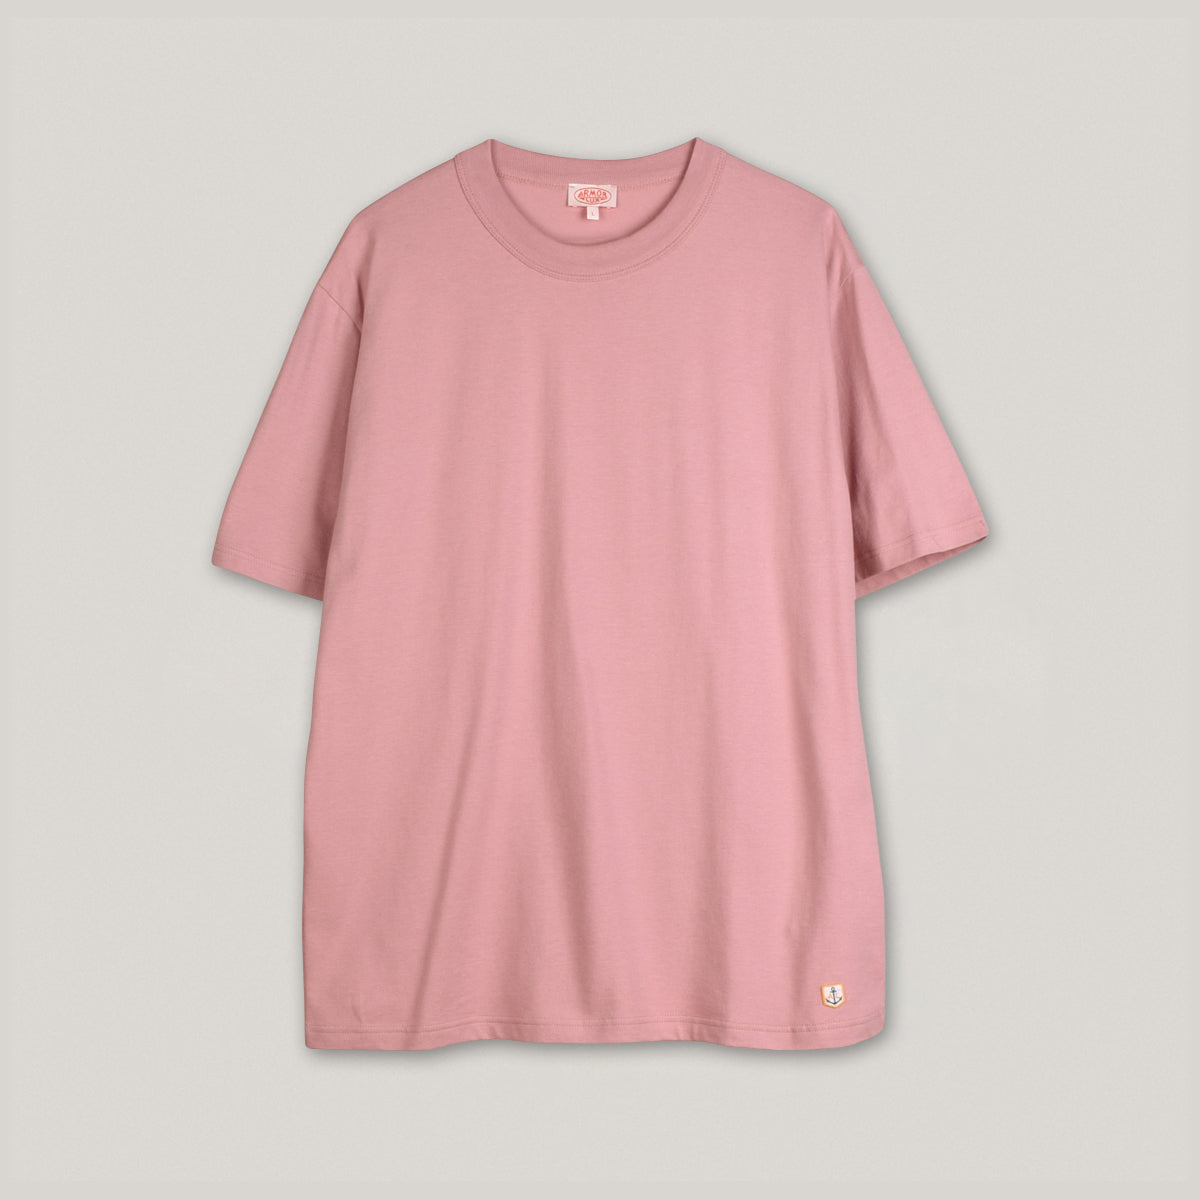 ARMOR LUX HERITAGE T-SHIRT - ANTIC PINK